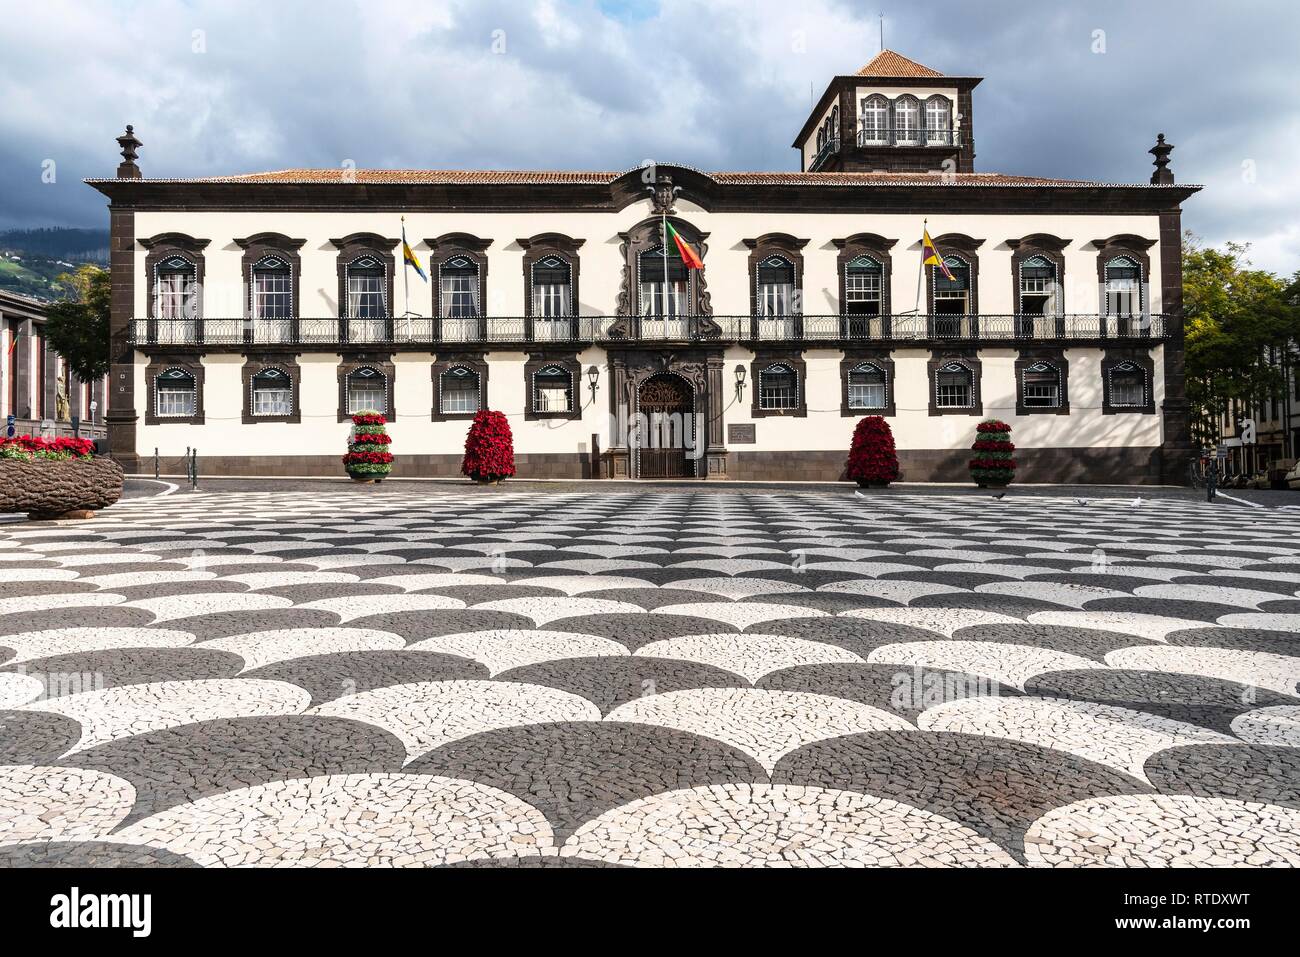 Rathau with town hall square, Funchal, Madeira Island, Portugal Stock Photo